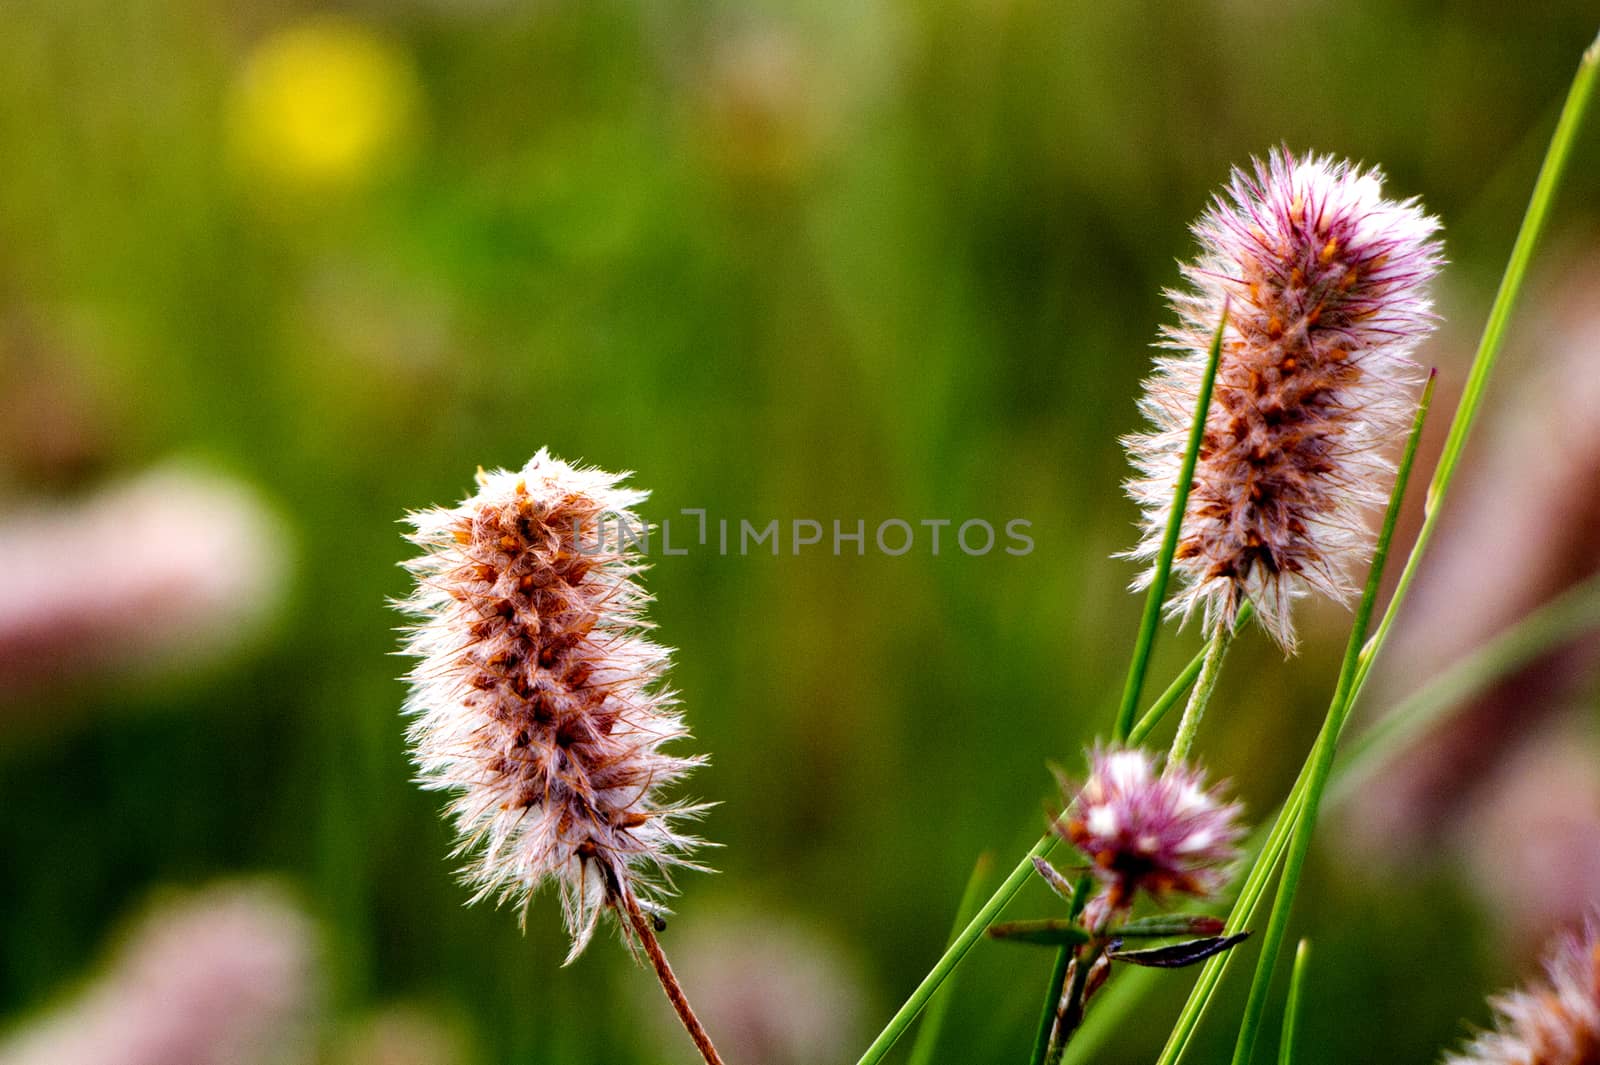 Hairy Flowers by Mads_Hjorth_Jakobsen